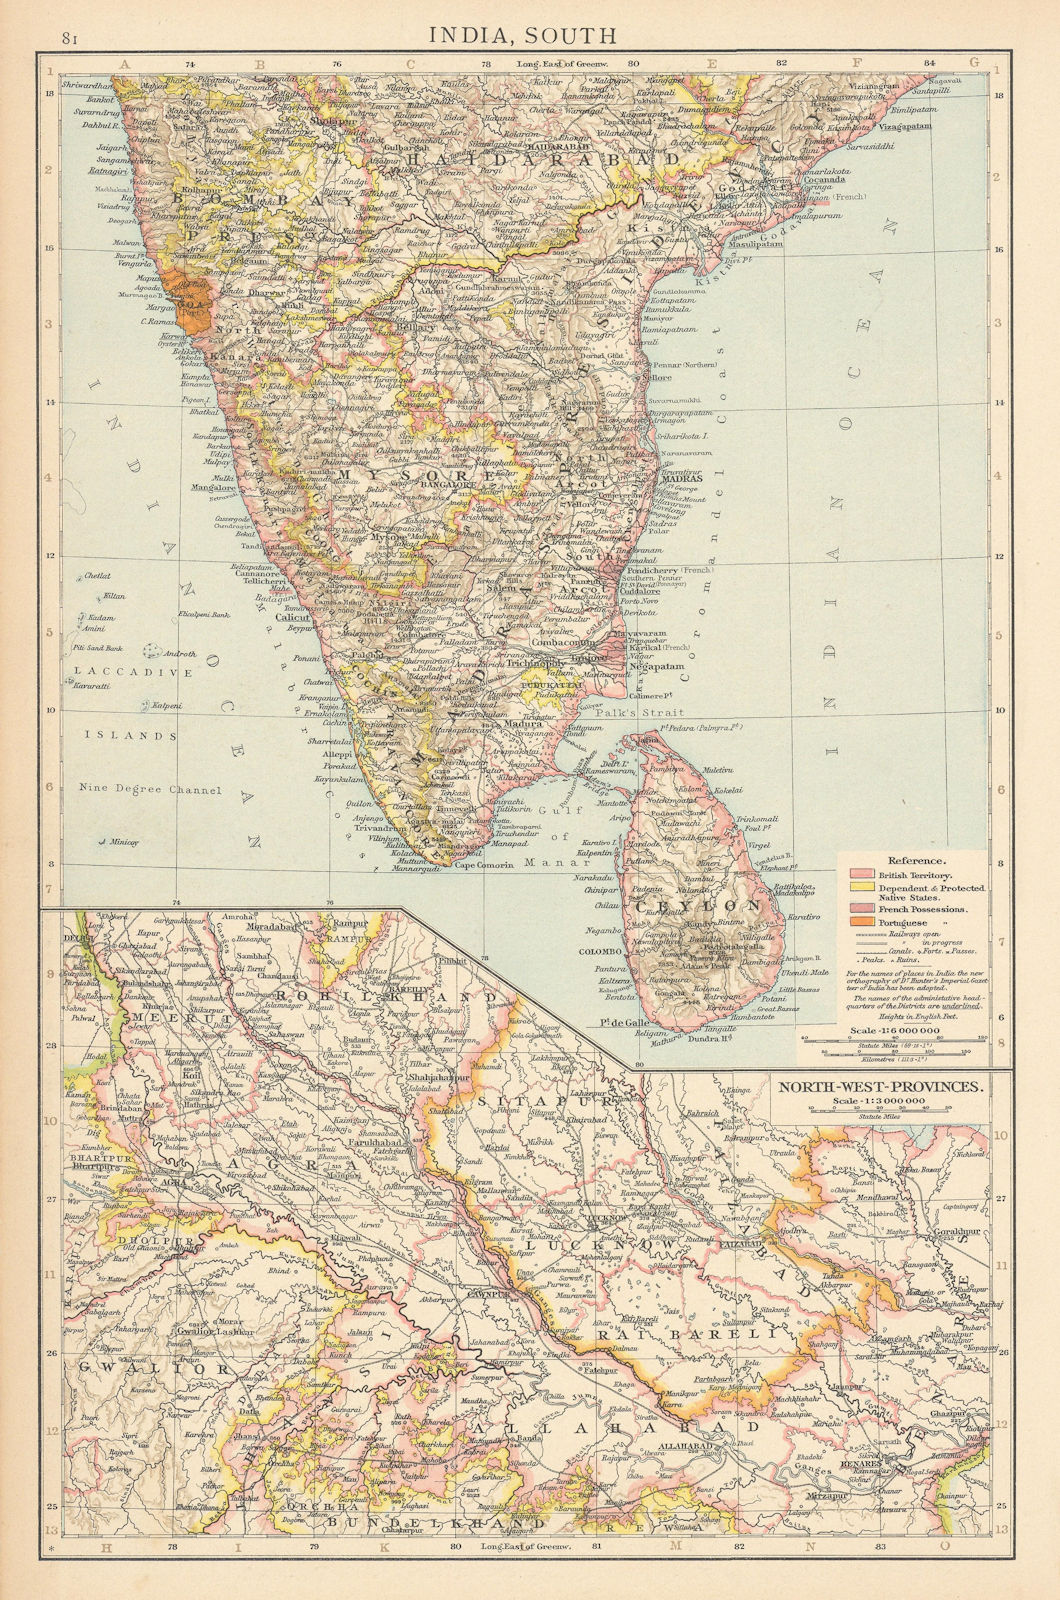 India South & North-west Provinces. Goa British French Portuguese TIMES 1895 map